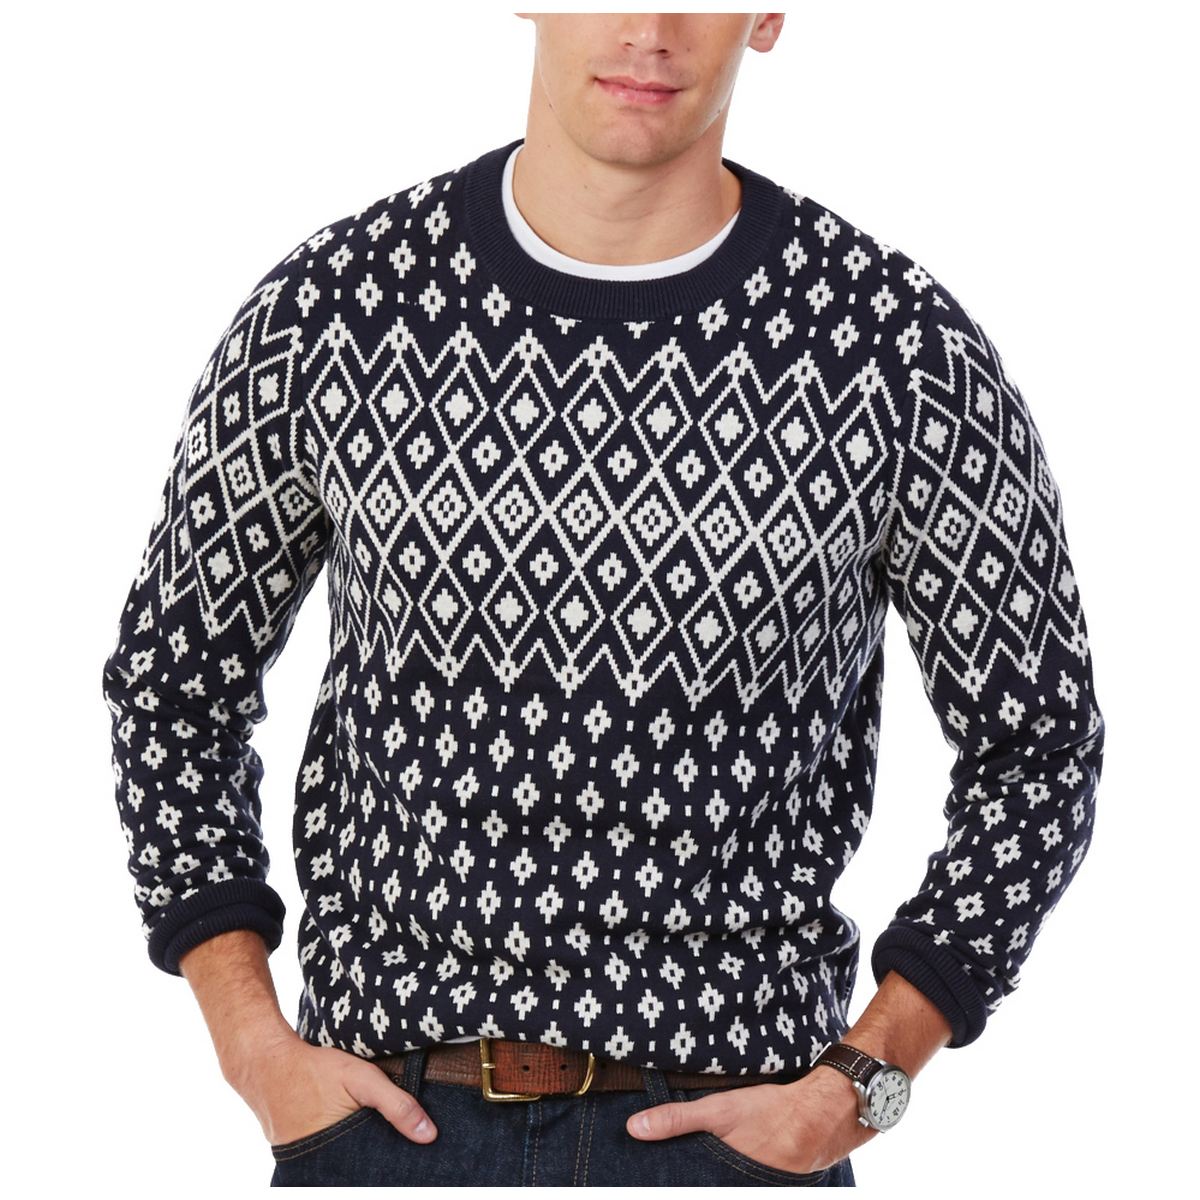 UUYUK Men Slim Fit Cable Knit Long Sleeve Round Neck Sweater Pullover